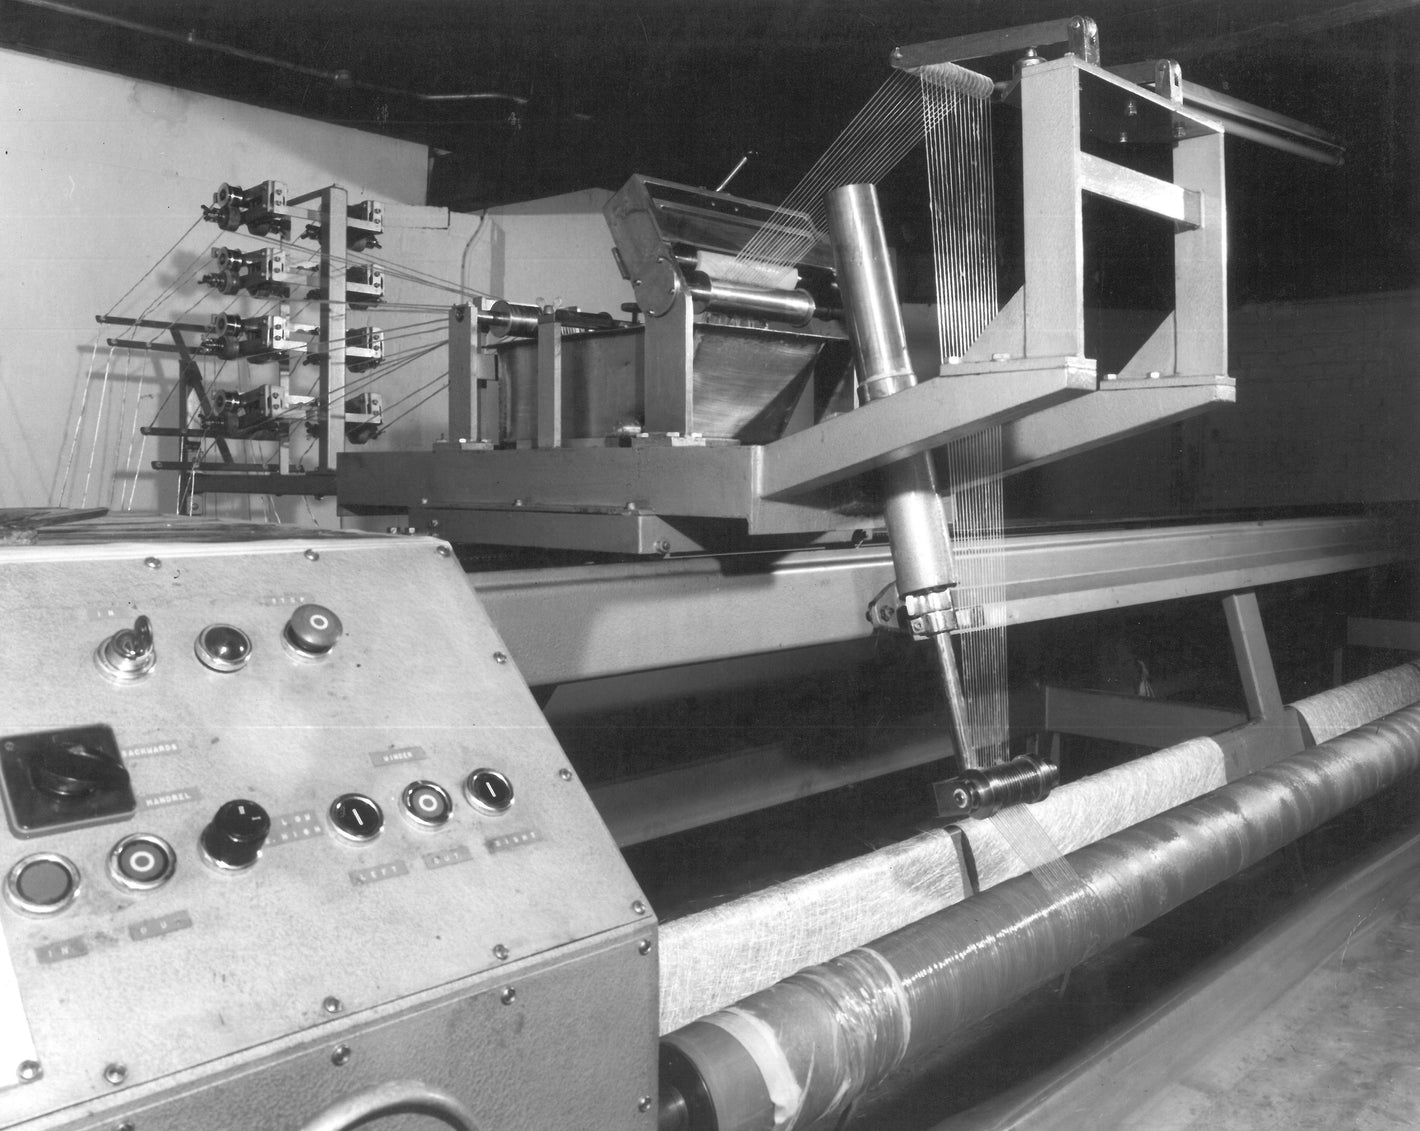 A black and white photo of filament winding when the technology was in its infancy and being developed with more automated equipment